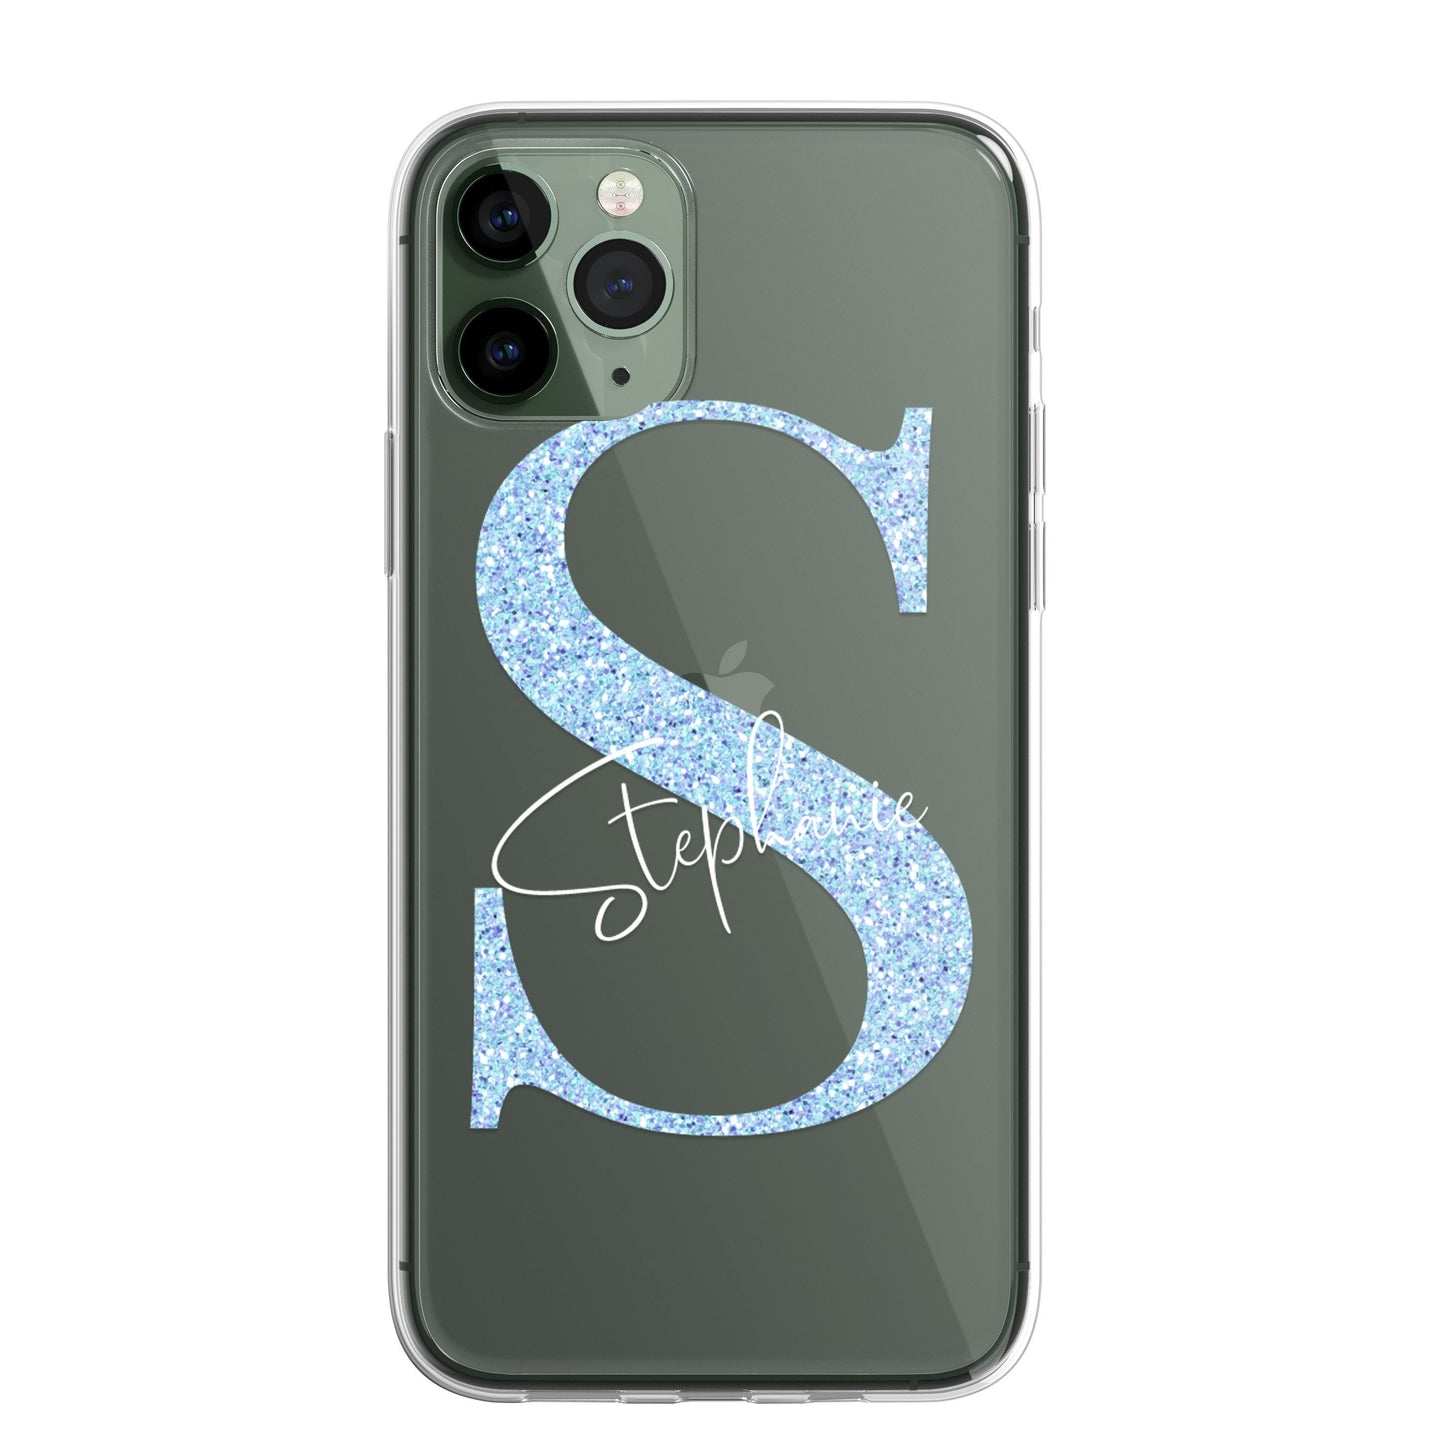 iPhone Case Personalised Glitter Style Custom Initials Name Phone Case Cover in CLEAR Silicone also for iPhone 12 & Samsung Galaxy